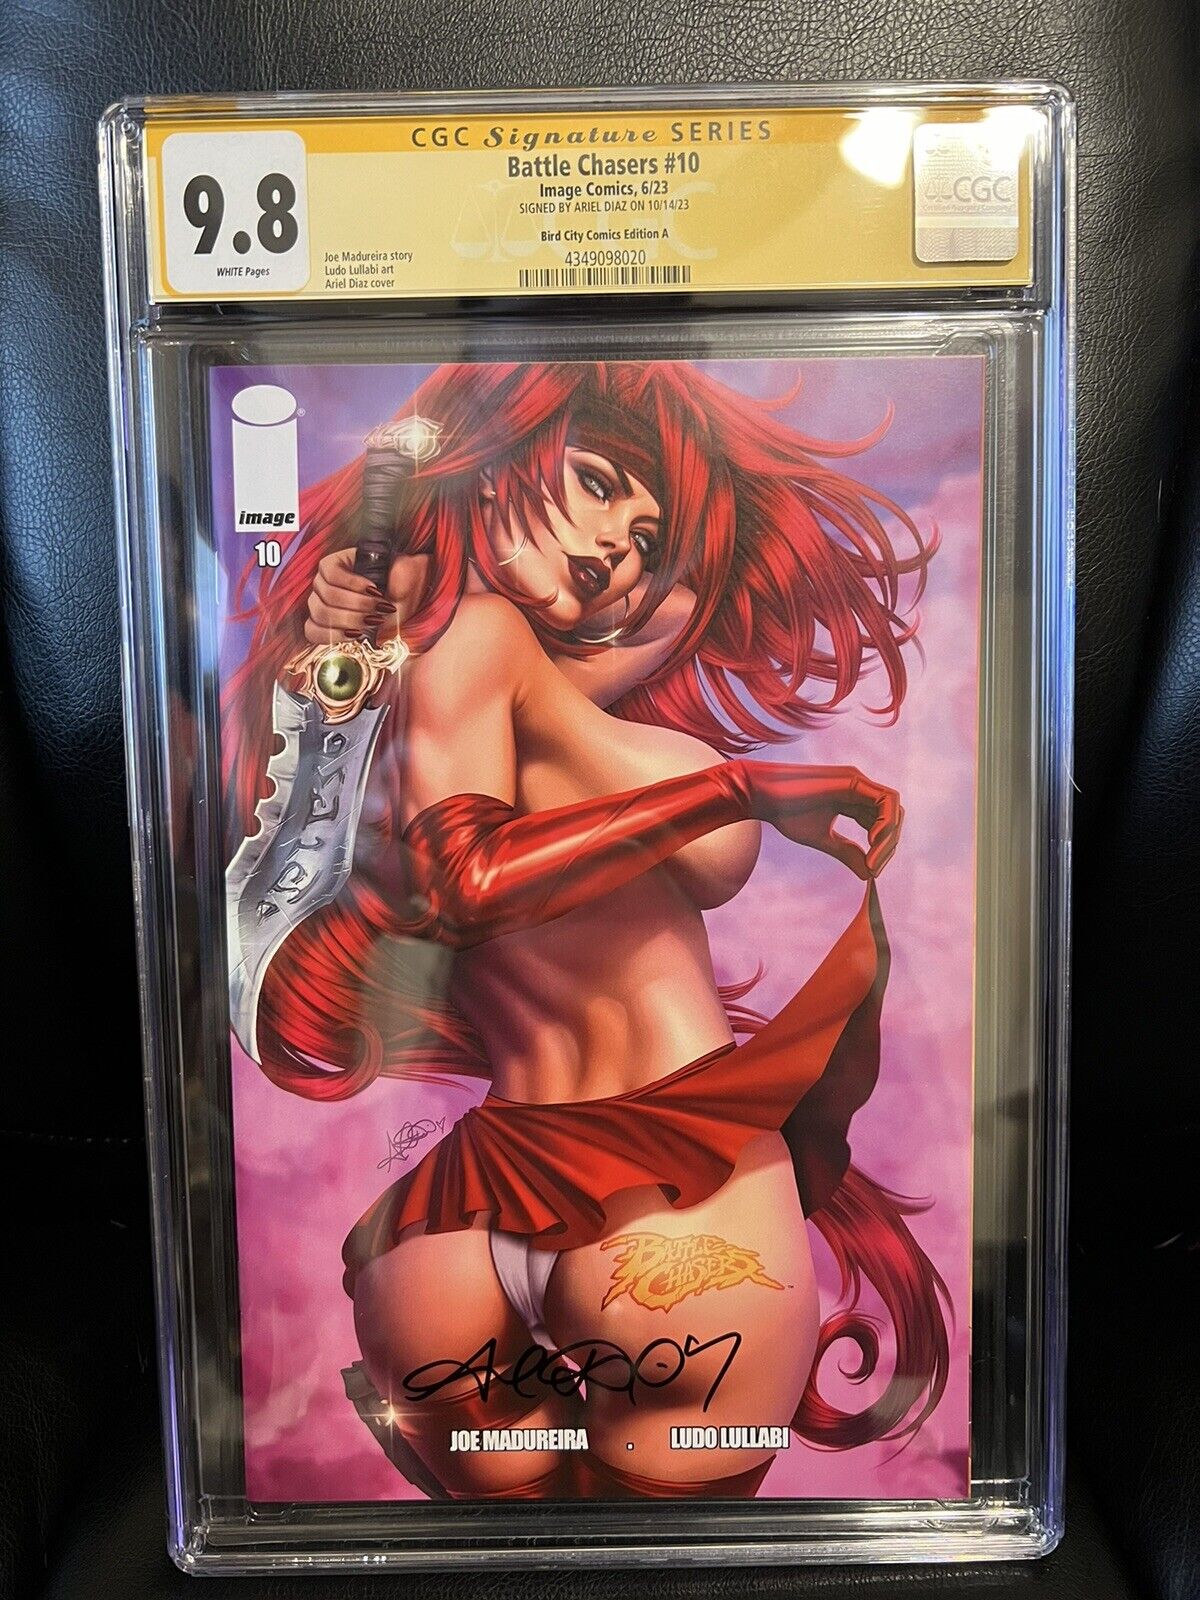 Battle Chasers #10 CGC SS 9.8 Virgin Signed Ariel Diaz w/ different color Tattoo